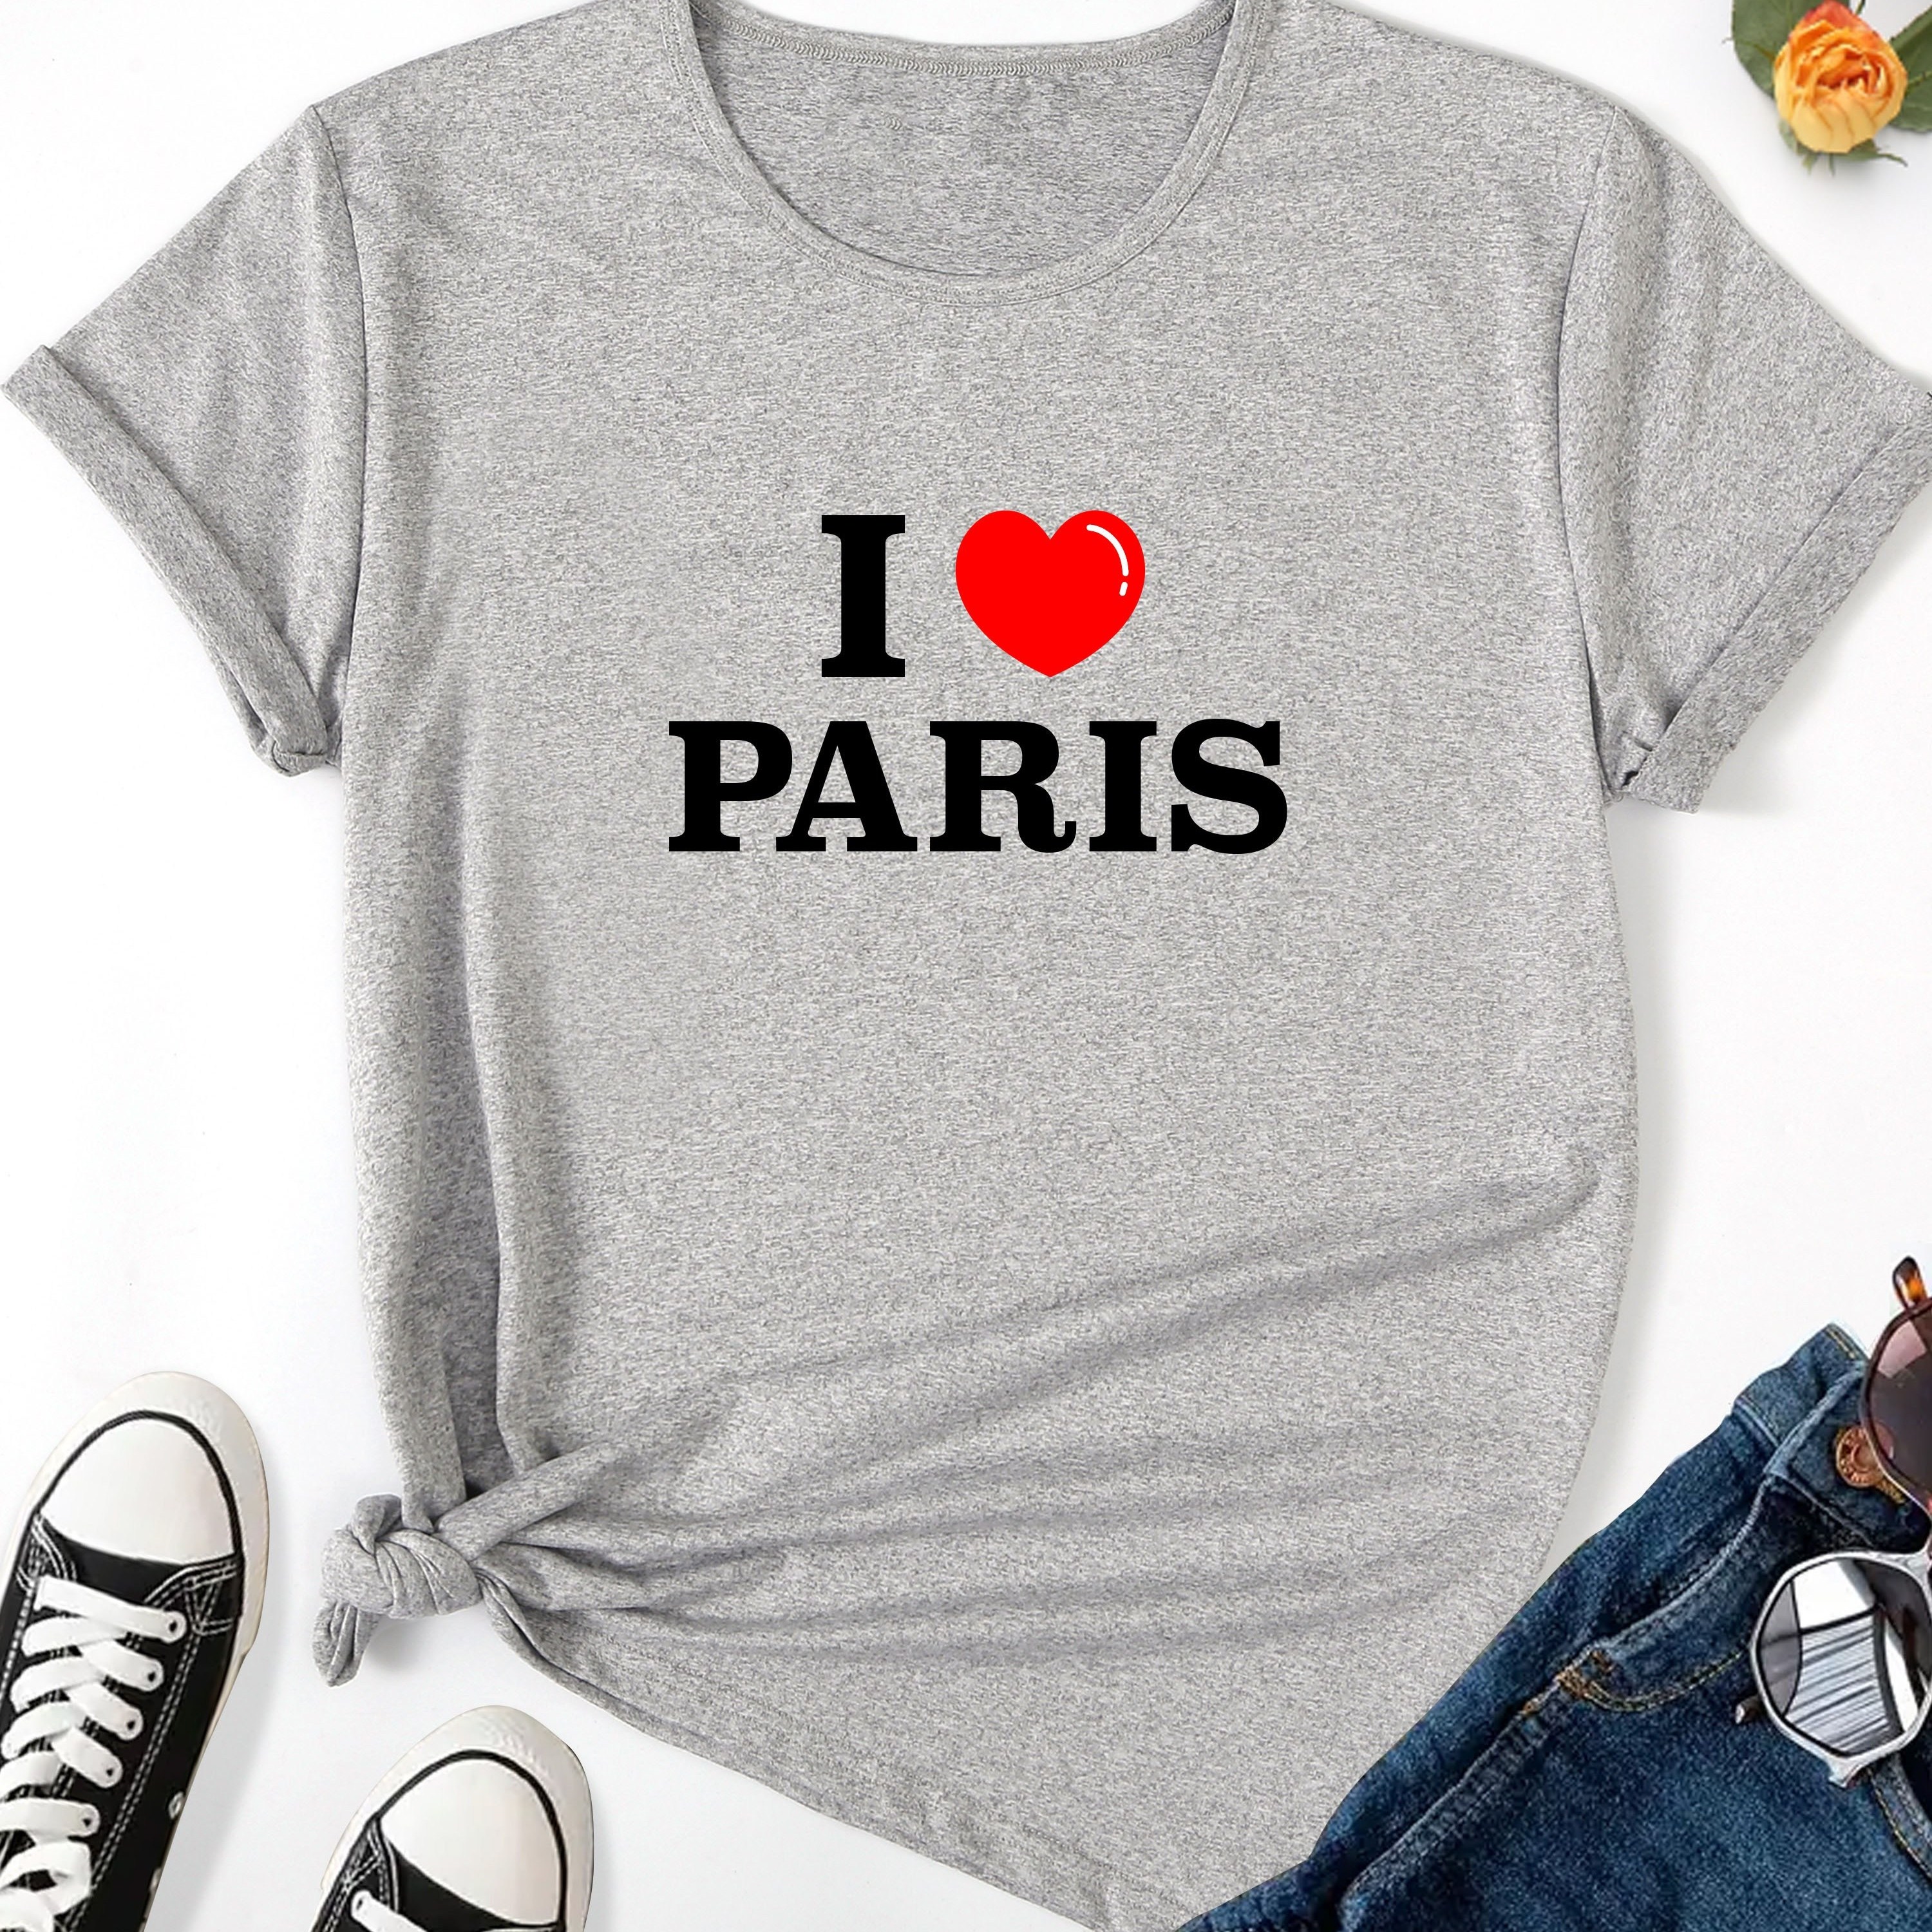 

I Love Paris Print T-shirt, Casual Crew Neck Short Sleeve Top For Spring & Summer, Women's Clothing